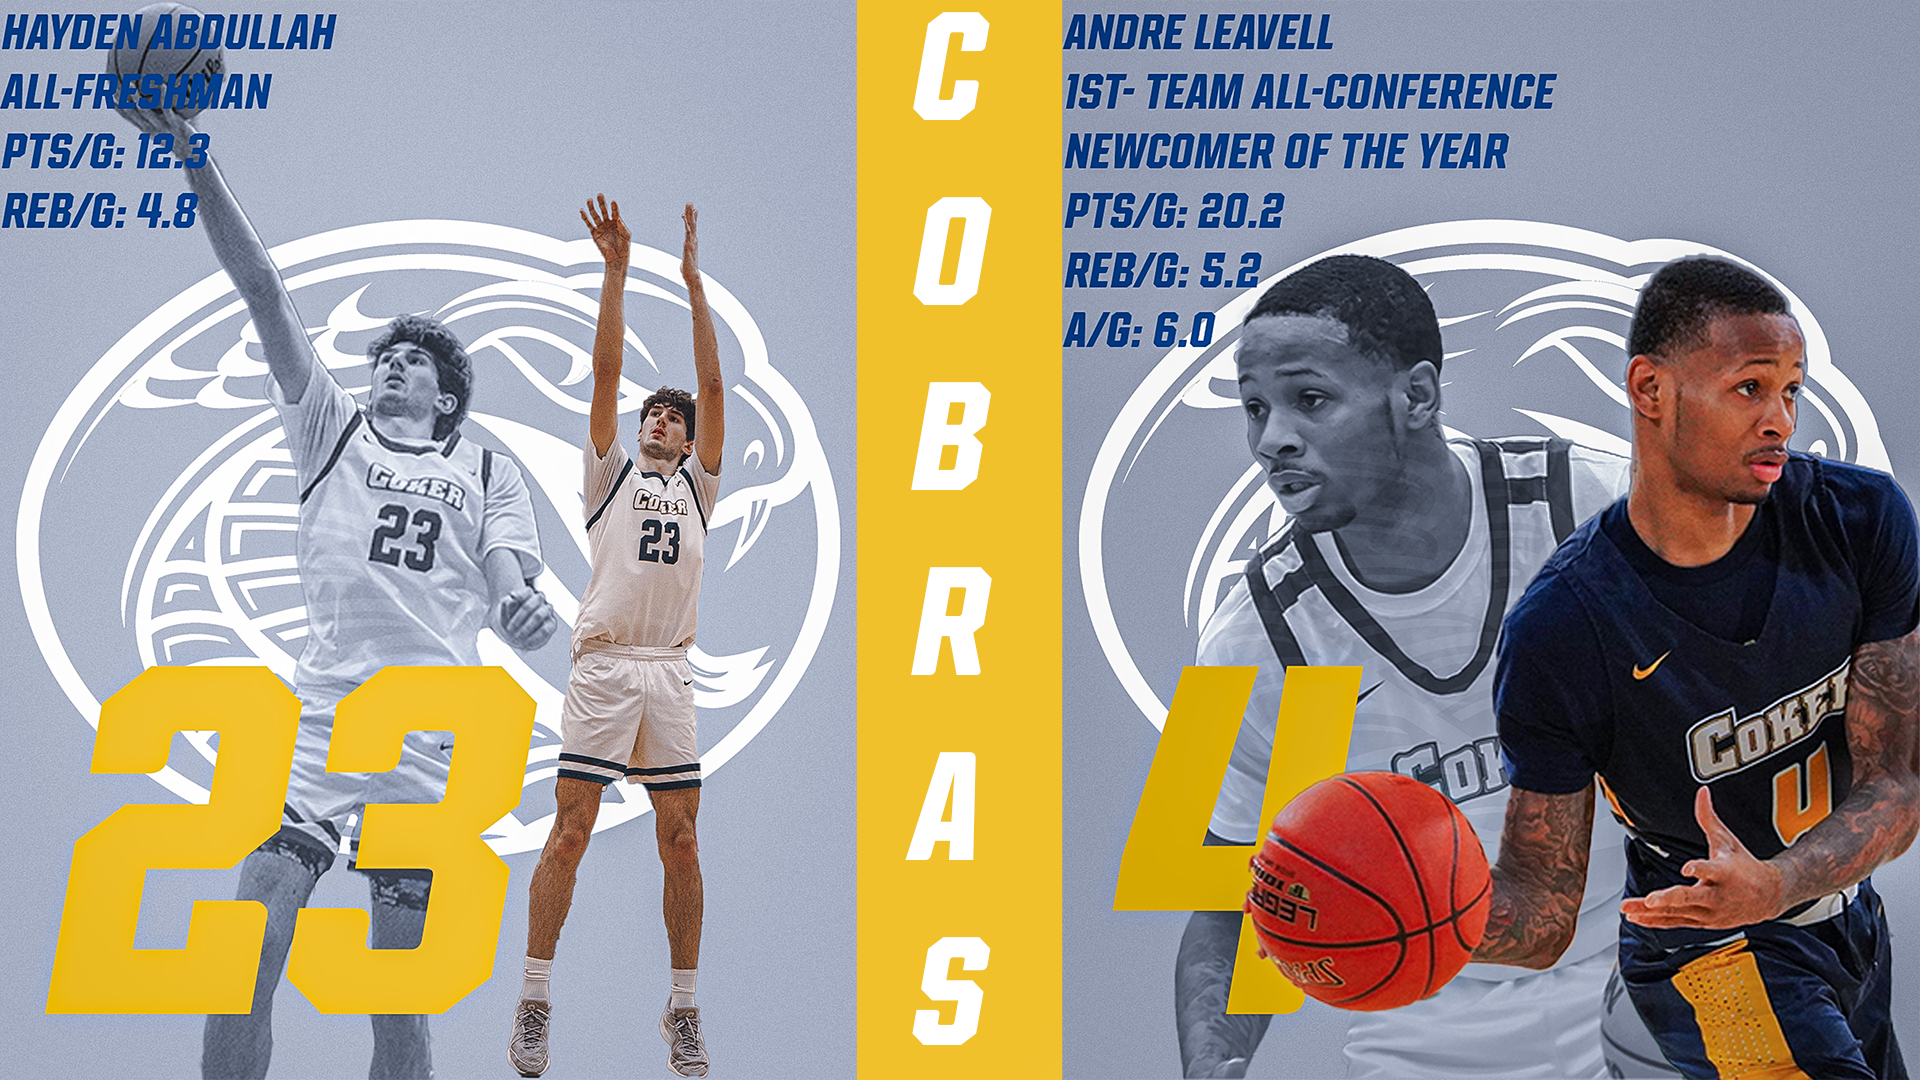 Andre Leavell Named Newcomer of the Year & Hayden Abdullah Earns All-Freshman